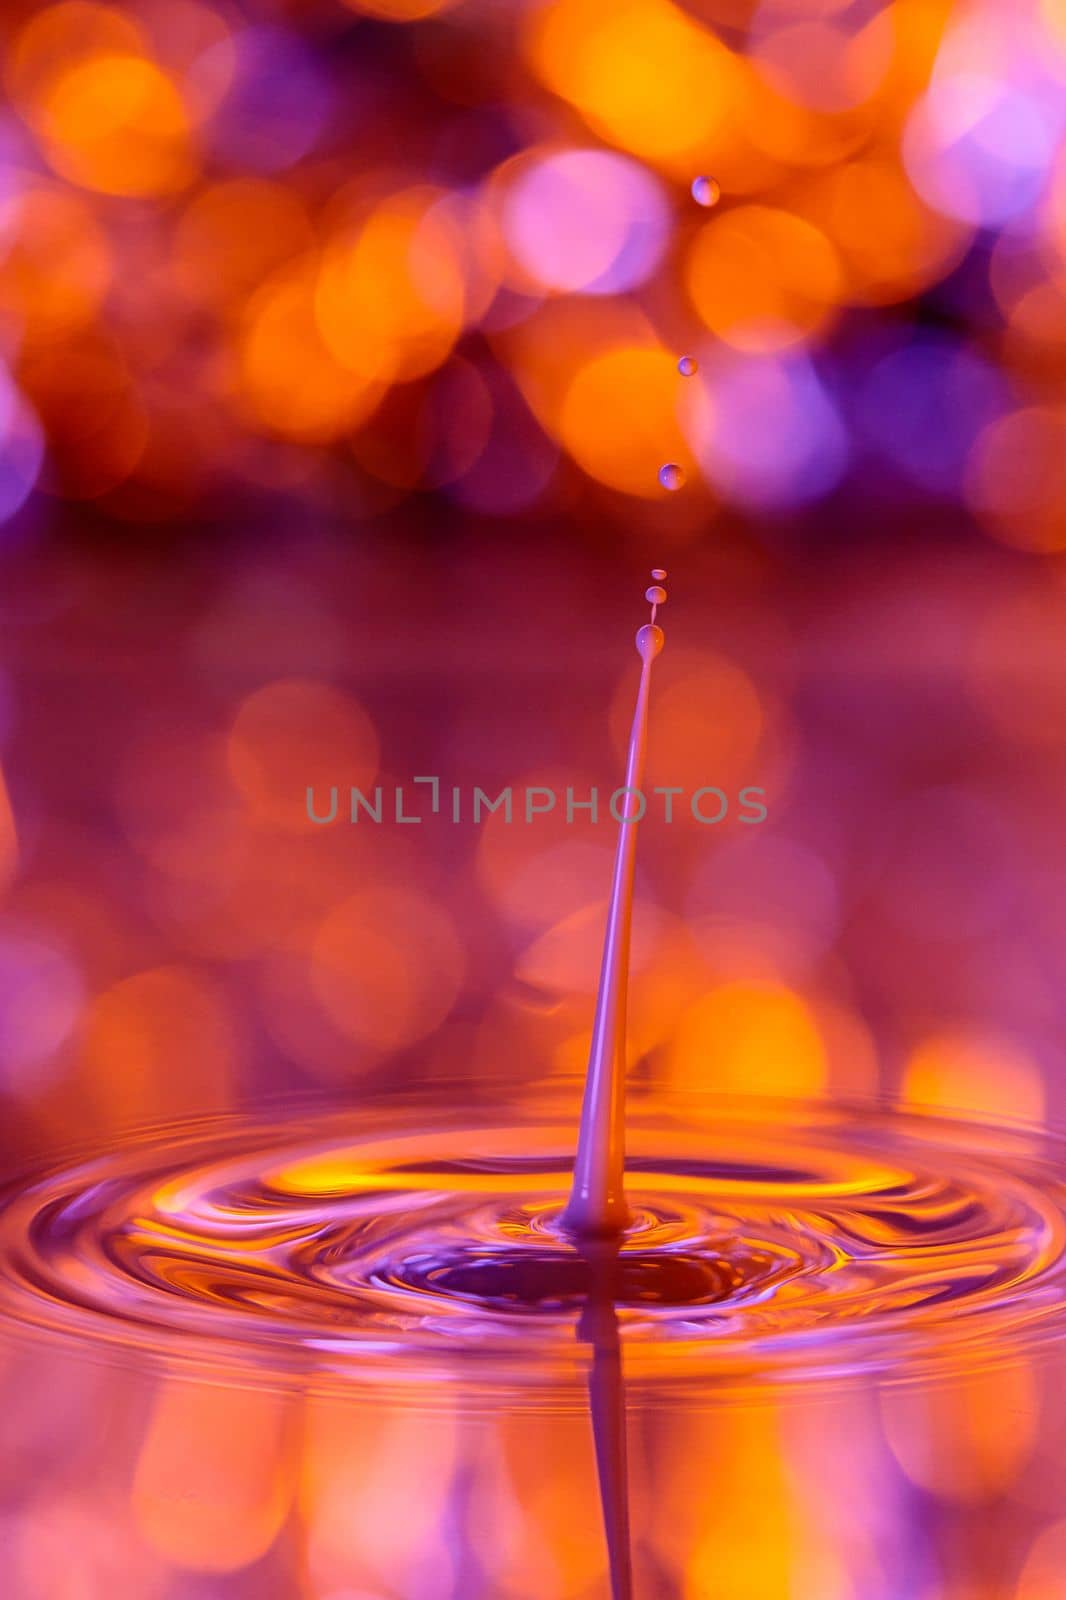 The drop falls into a dense liquid with an orange background. Abstract colorful background